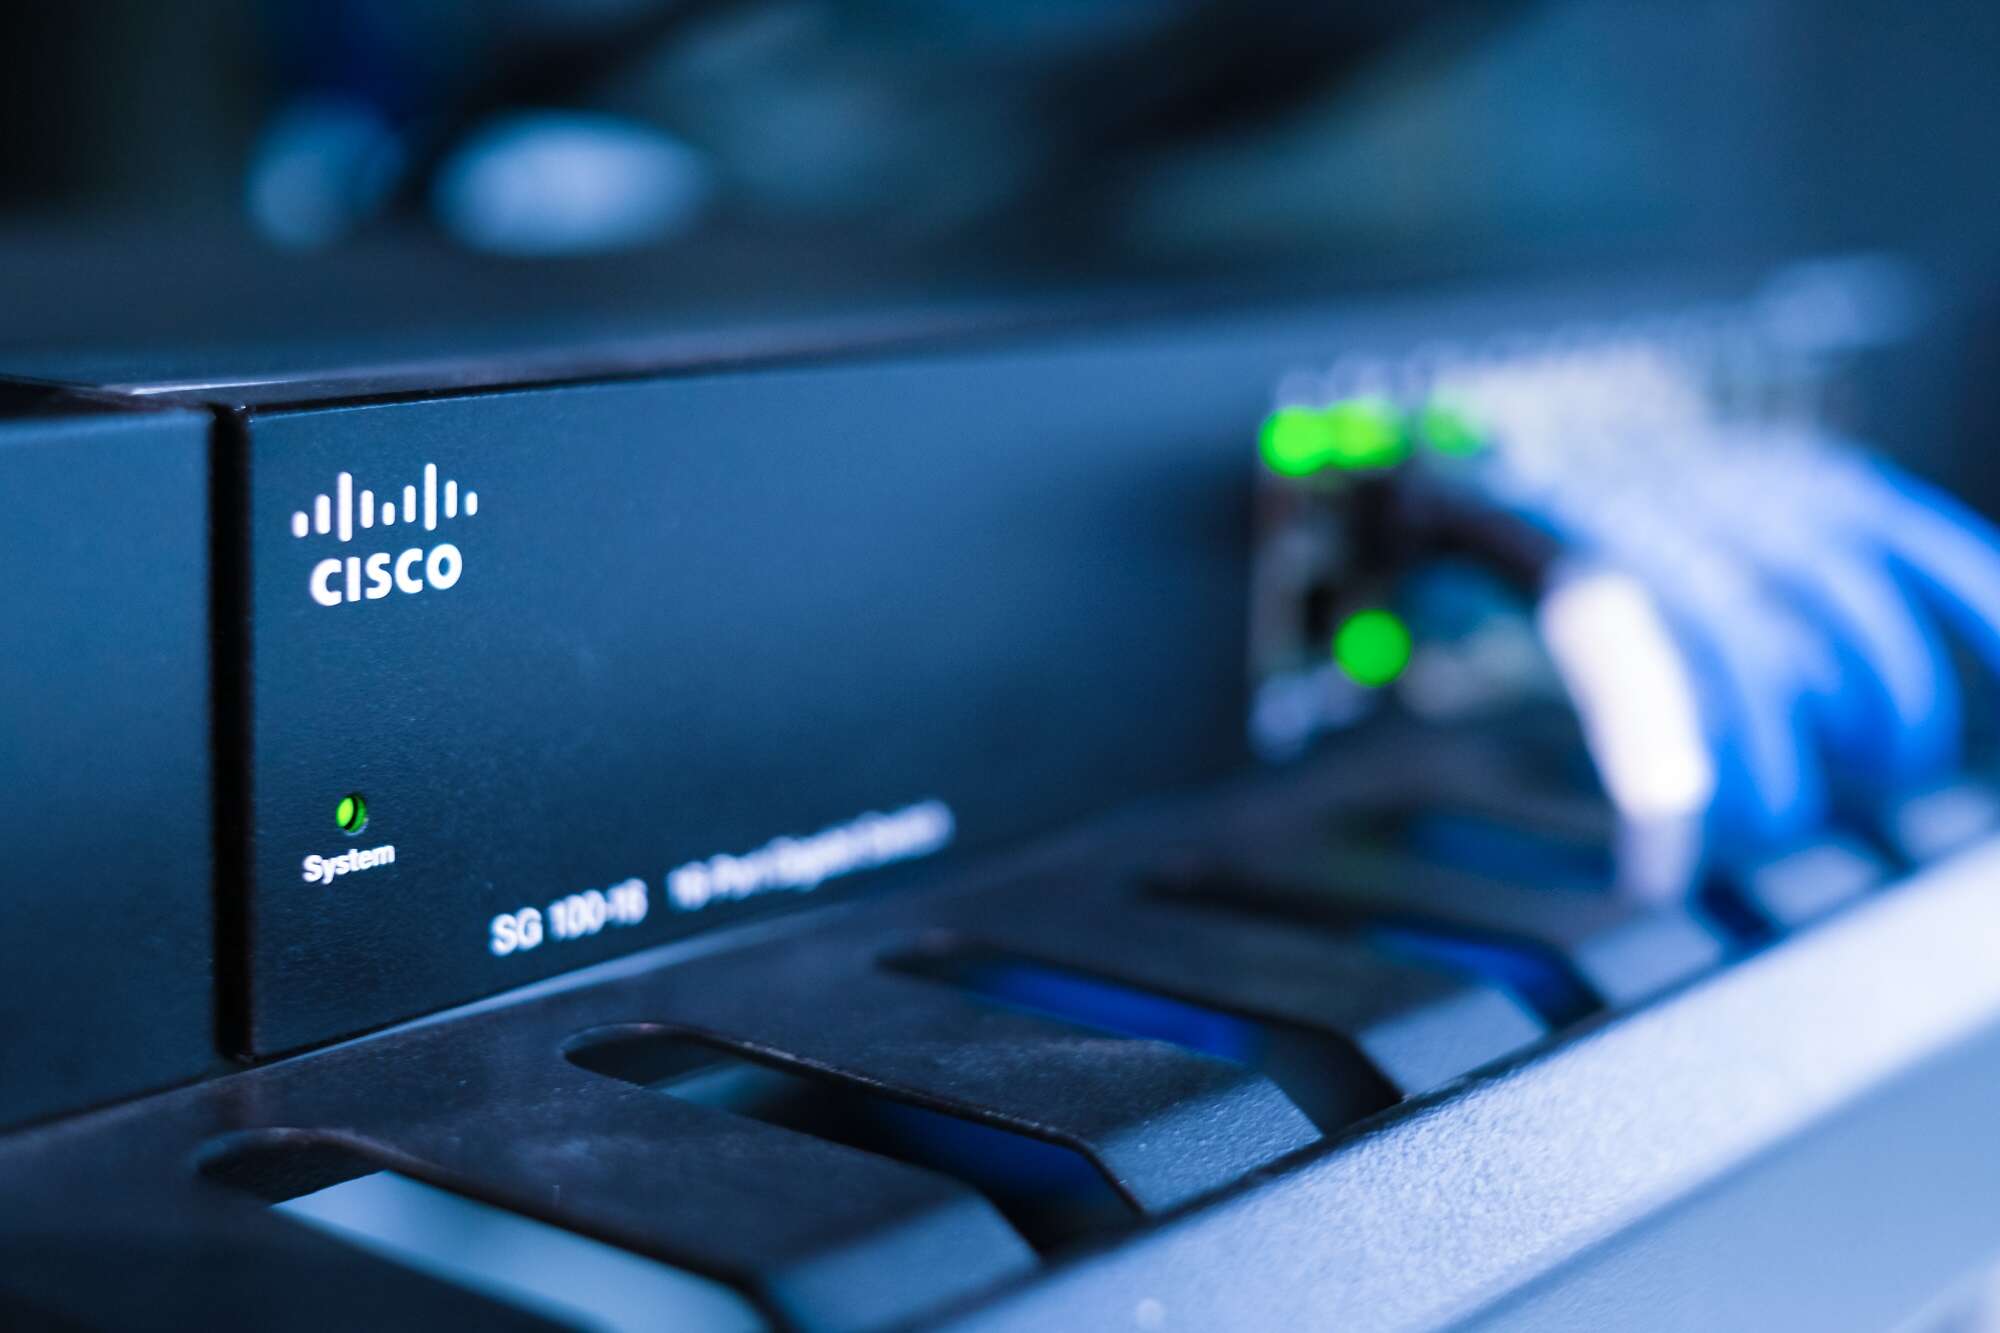 Amidst private cloud rumours, Cisco is betting big on a hybrid future